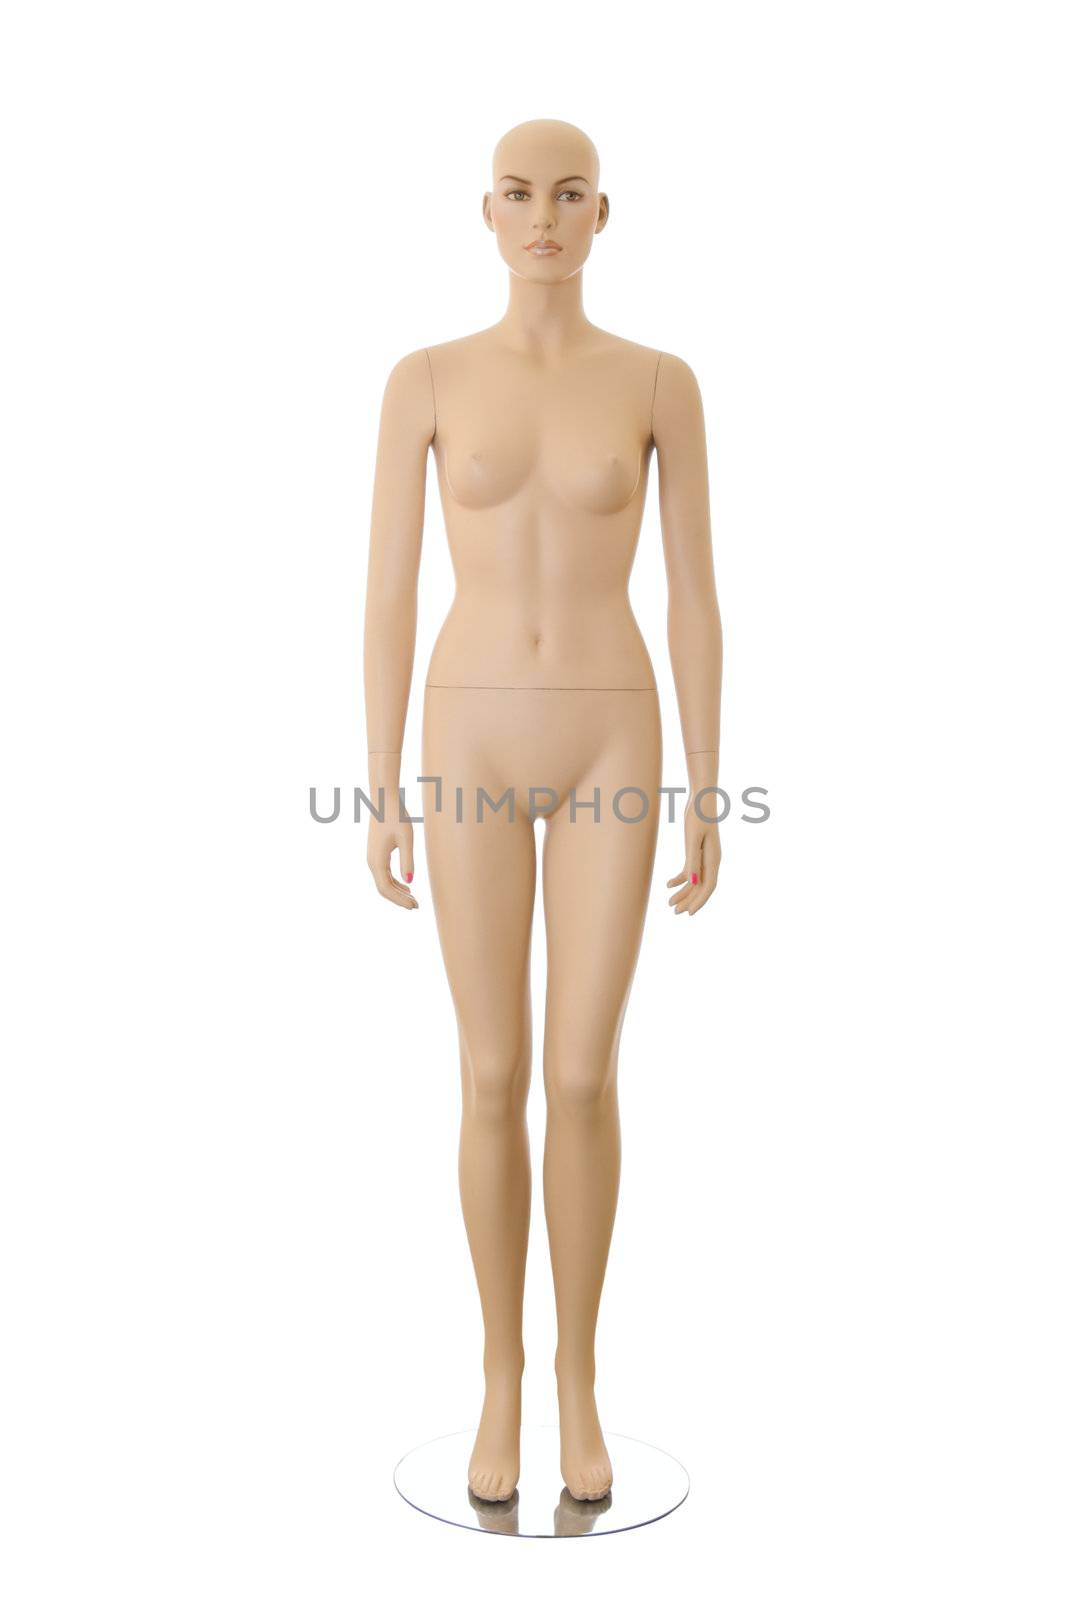 Detailed female mannequin without clothes. Isolated on white background